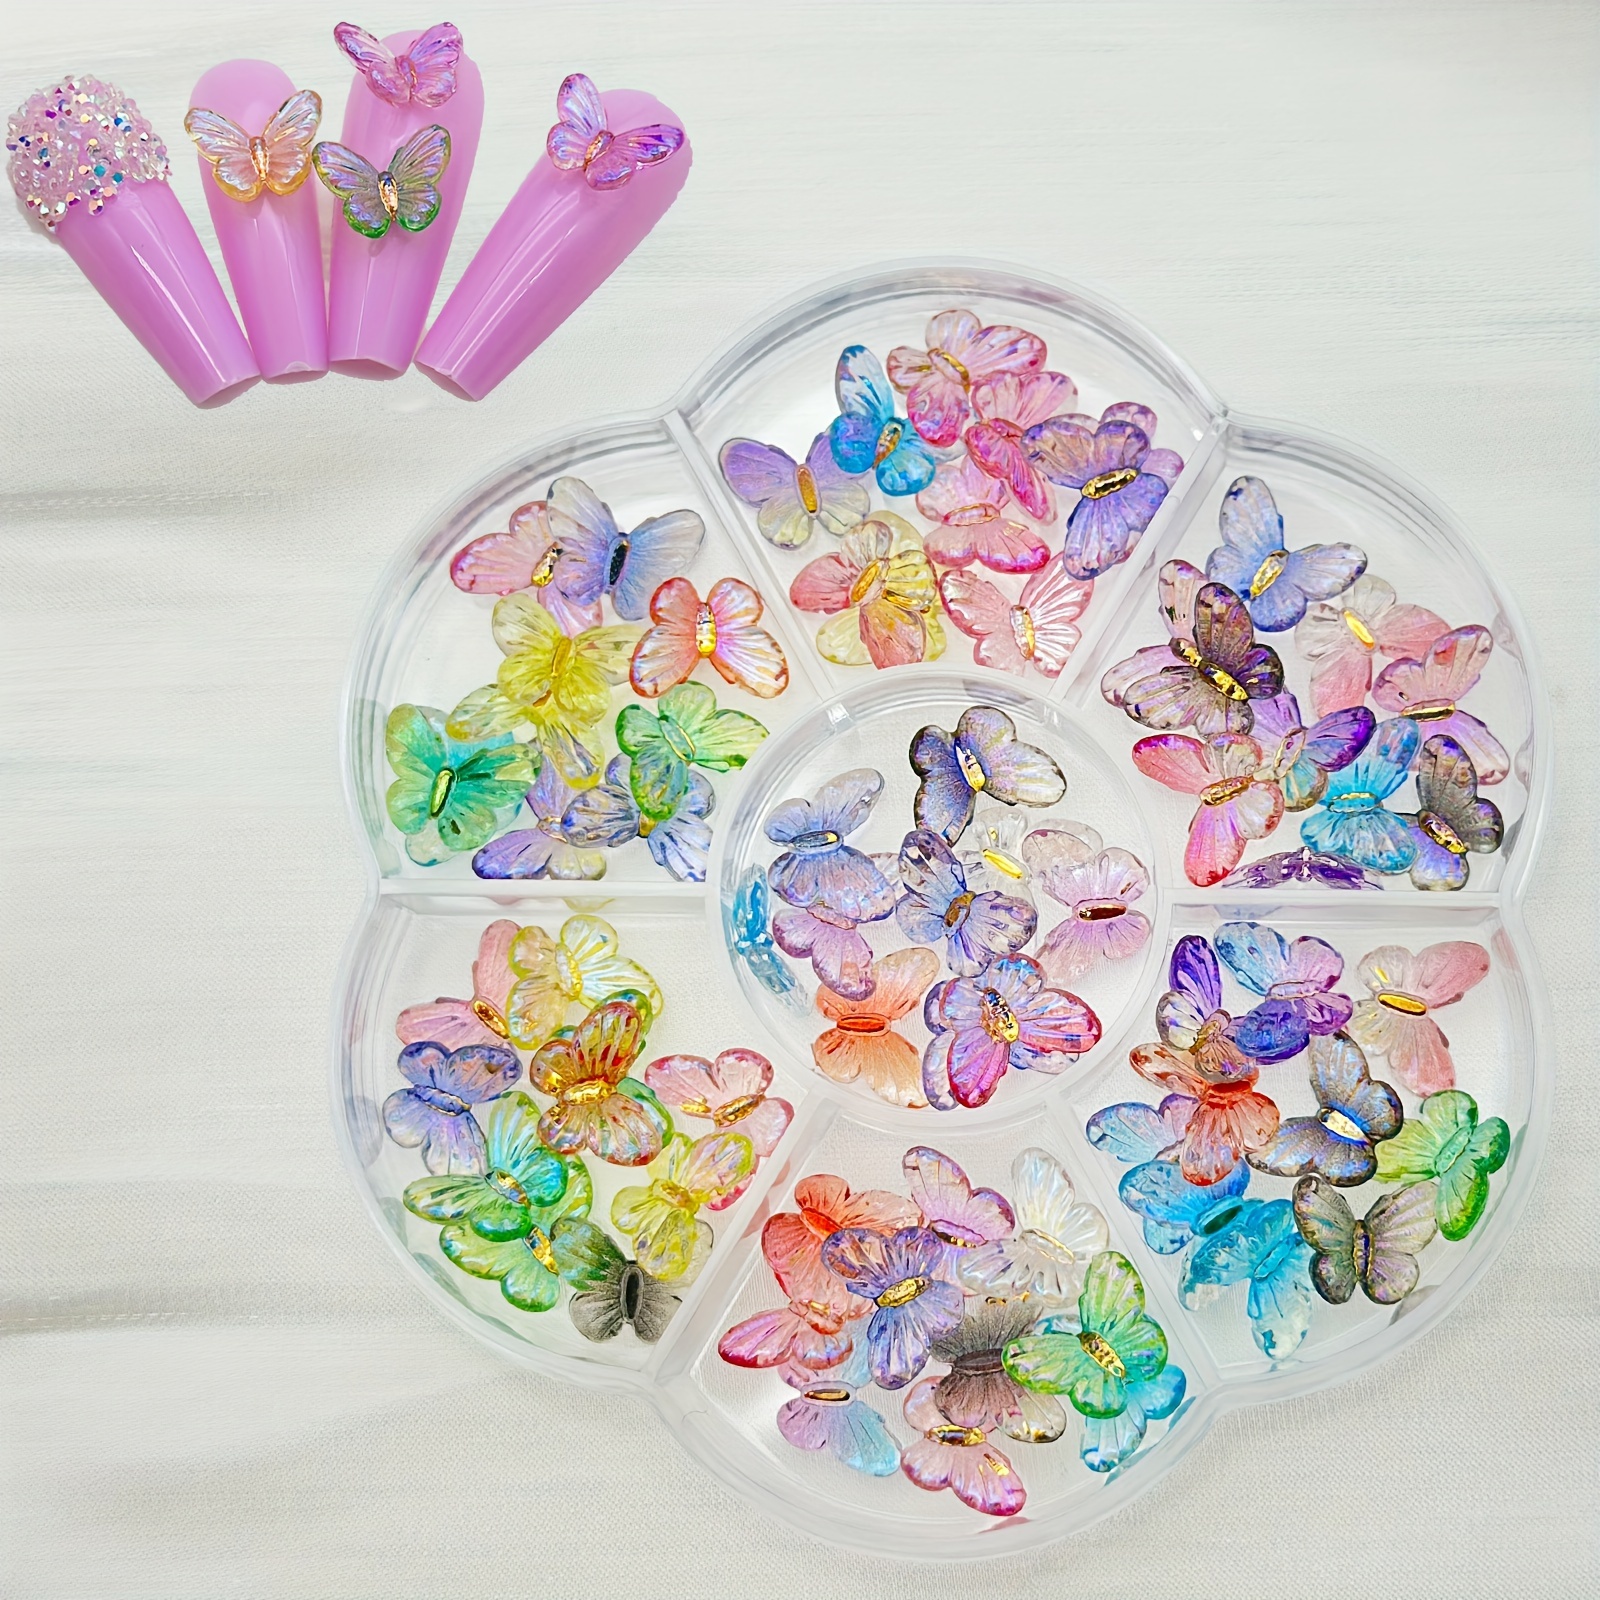 

70 Pcs Colorful Butterfly Nail Charms, 3d Resin Butterfly Nail Art Decorations, Cute Kawaii Nail Art Accessories, Women's Nail Design Supplies For Diy Manicure Decor